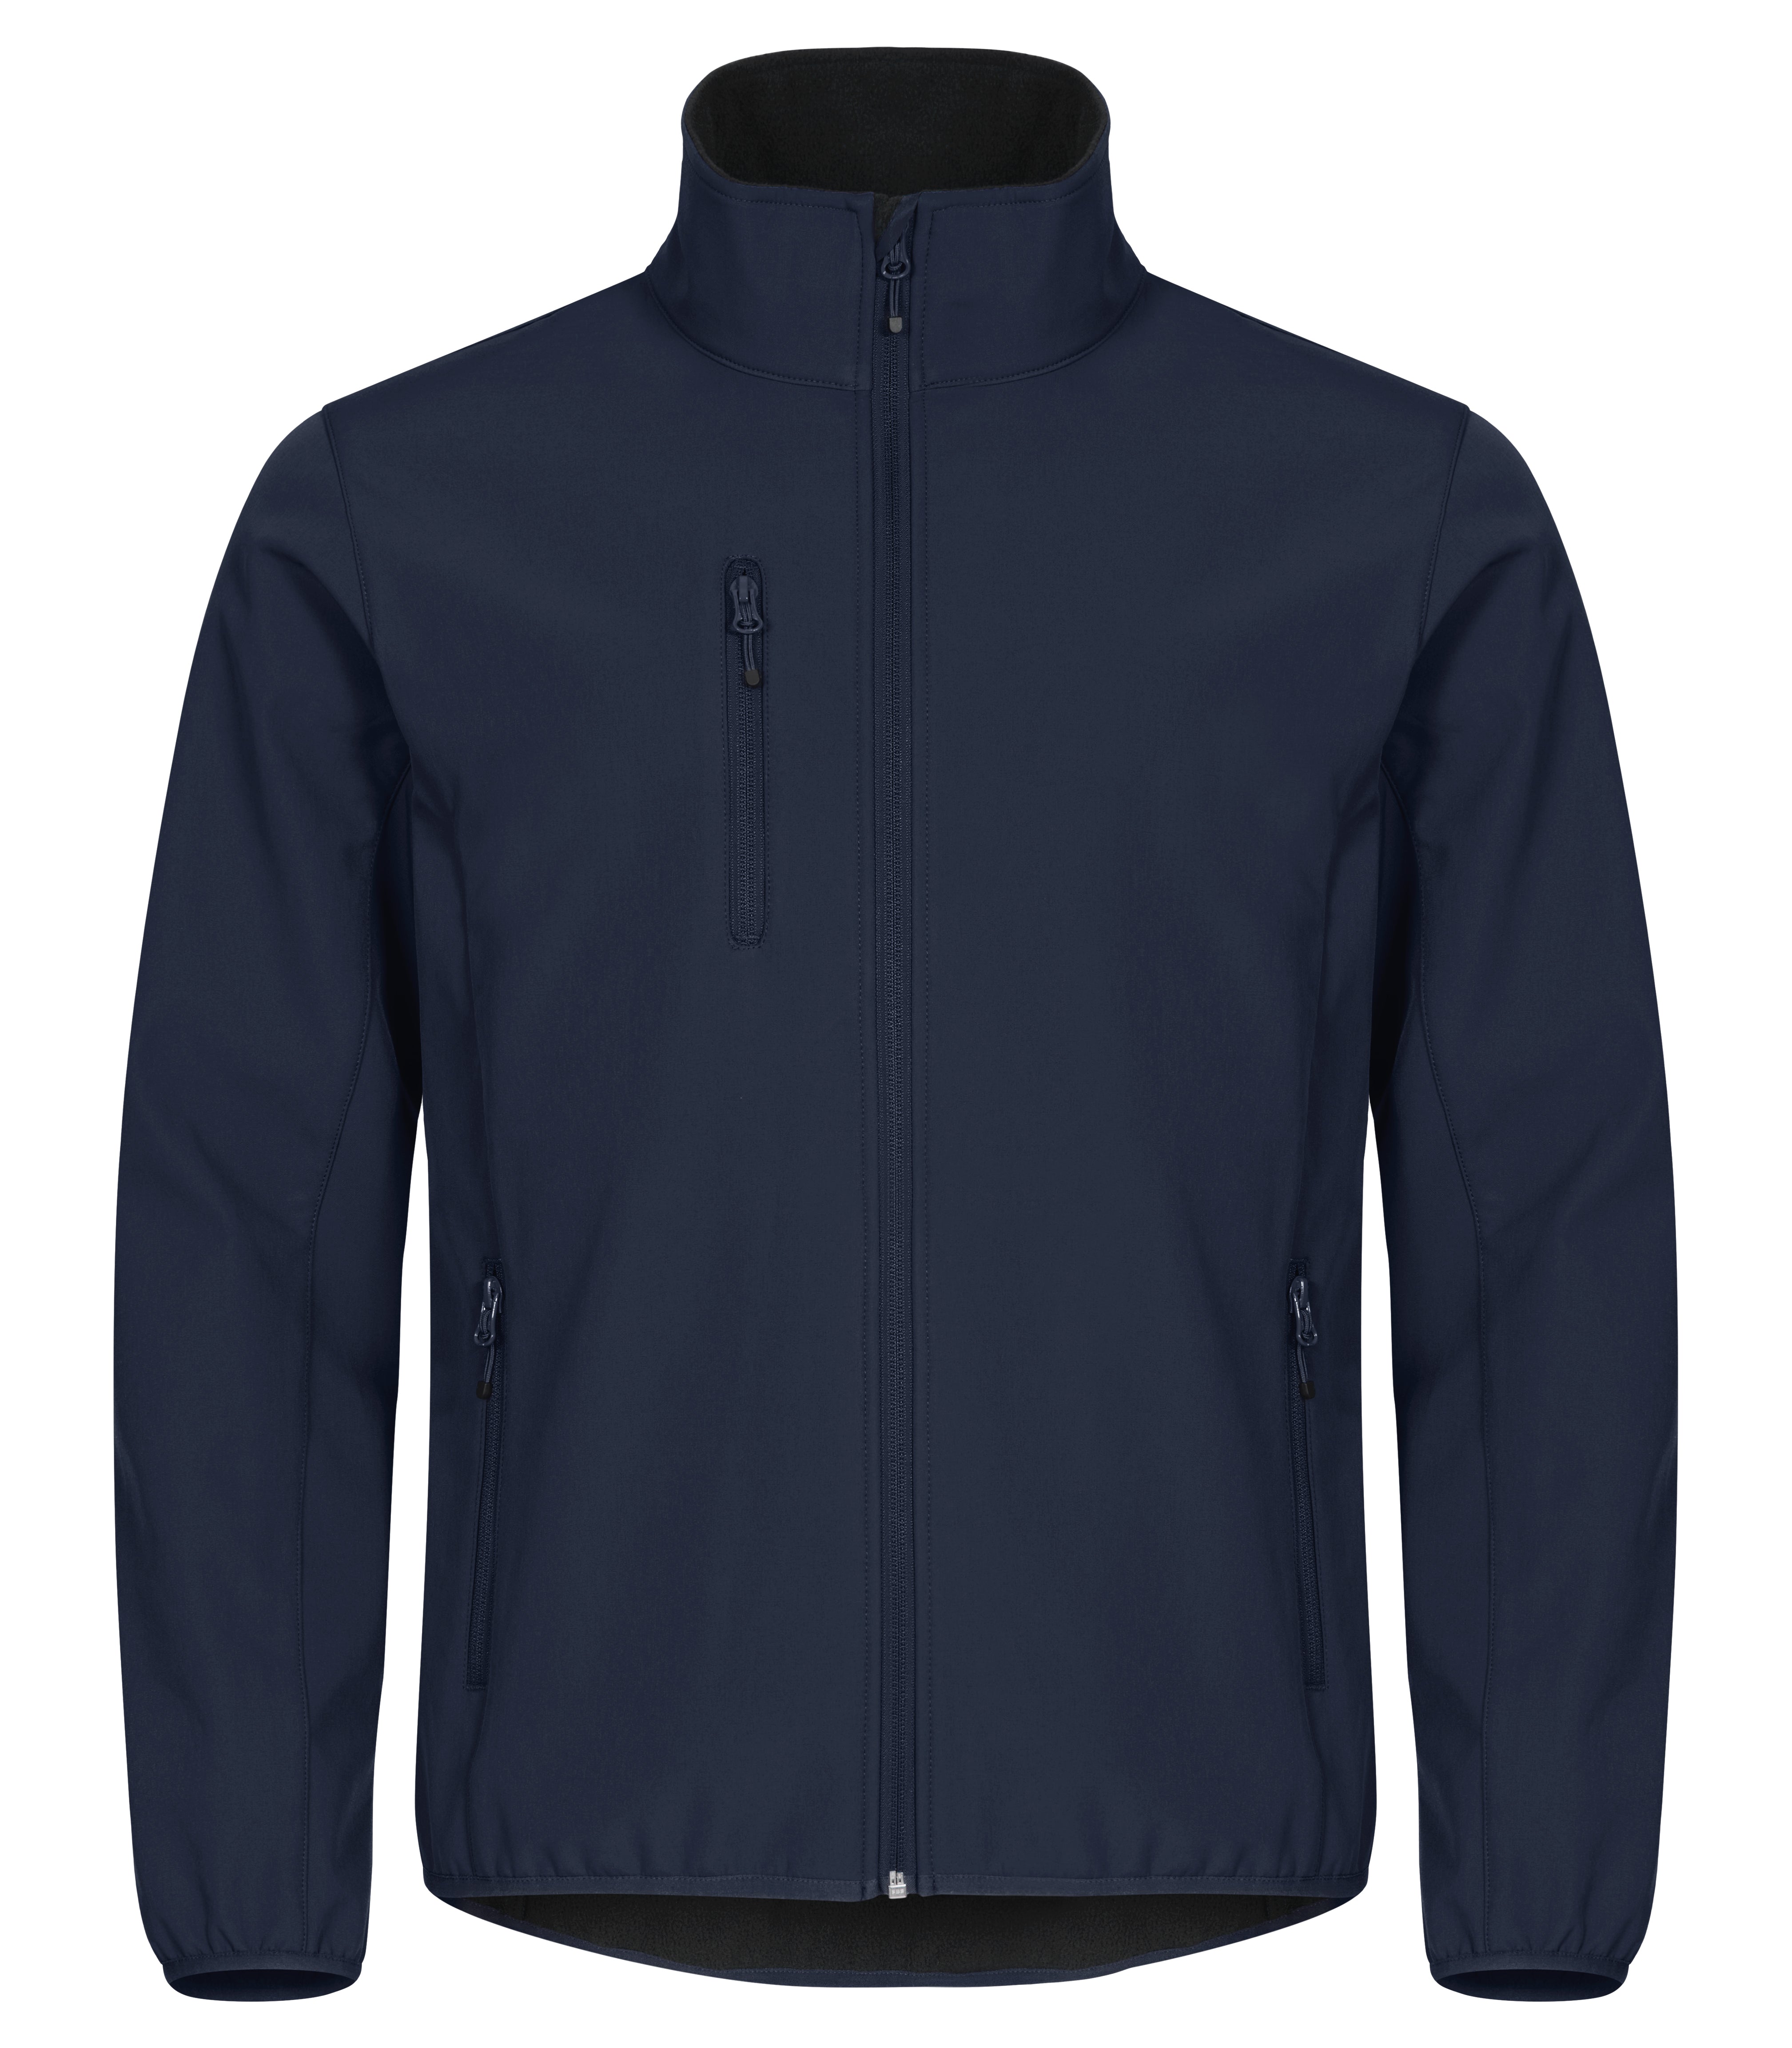 Classic Softshell Jacket | Love your clothing